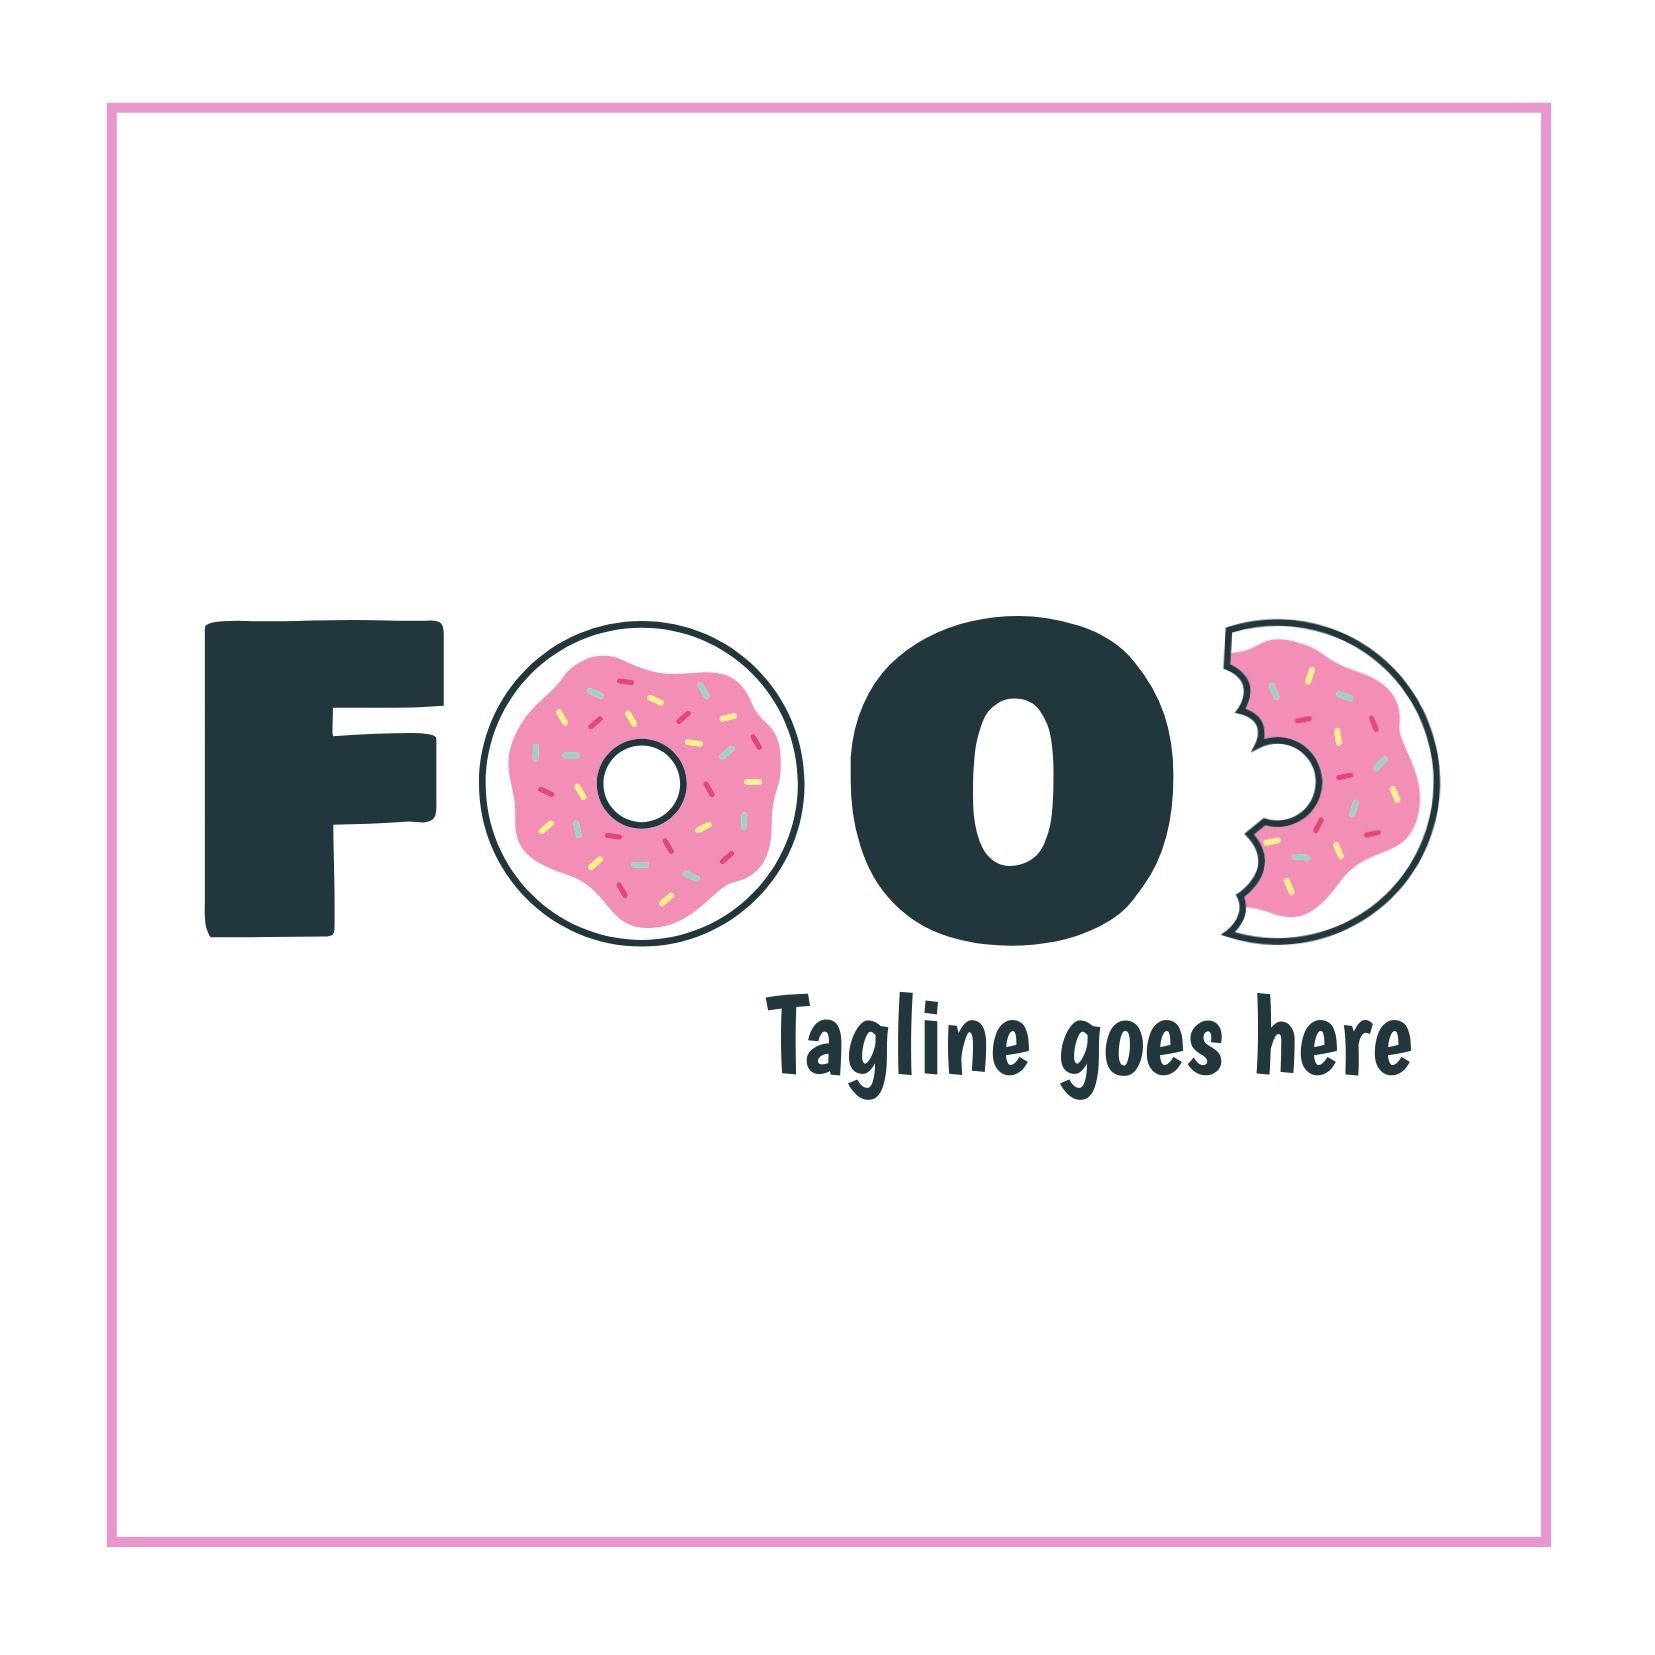 Food Logo With Donuts: Tagline = 'Tagline goes here' - Tips on how to create the right logo for your brand - Image